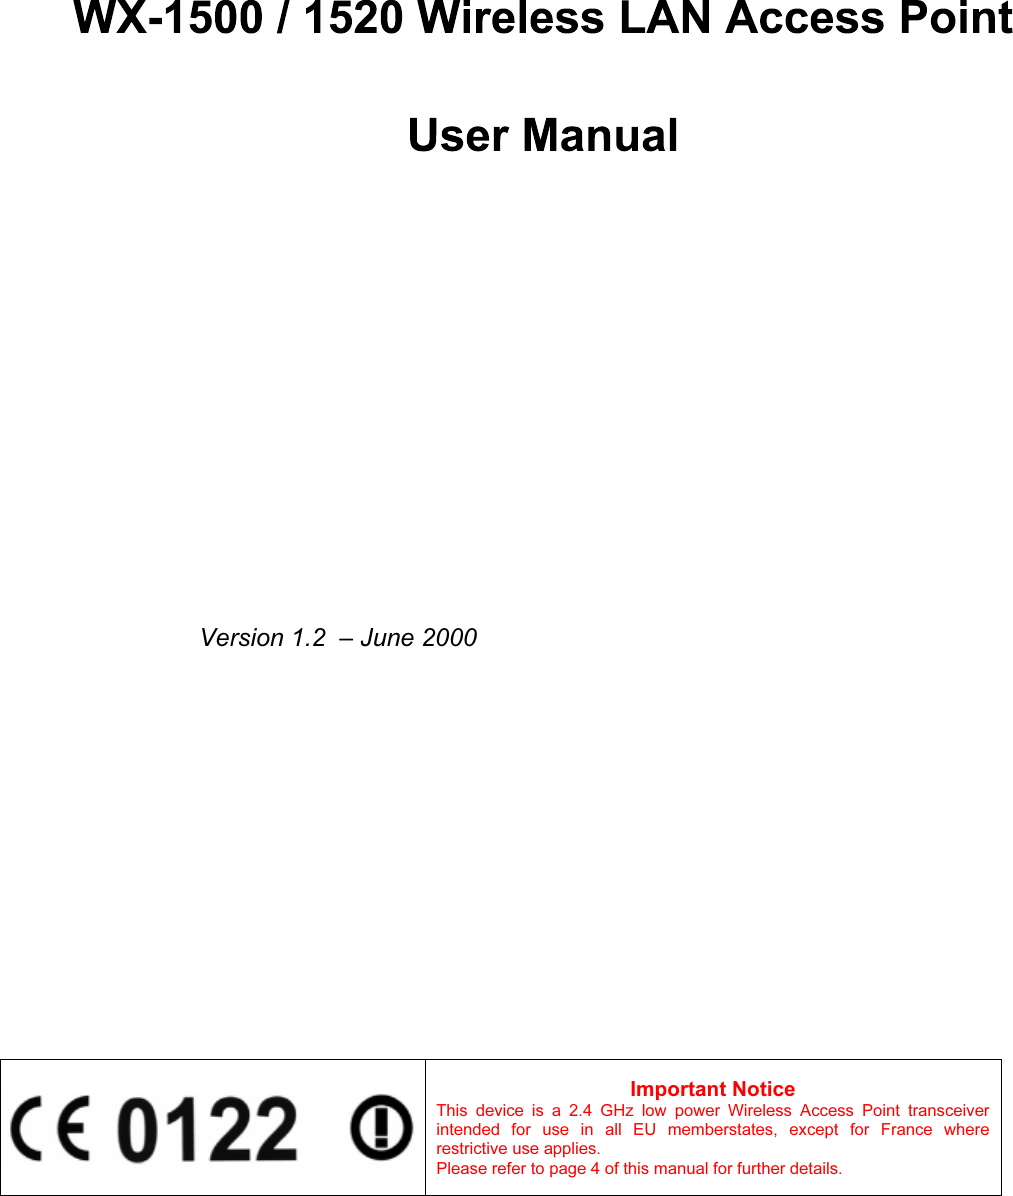                            Version 1.2  – June 2000Important NoticeThis  device  is  a  2.4  GHz  low  power  Wireless  Access  Point  transceiverintended  for  use  in  all  EU  memberstates,  except  for  France  whererestrictive use applies.Please refer to page 4 of this manual for further details.